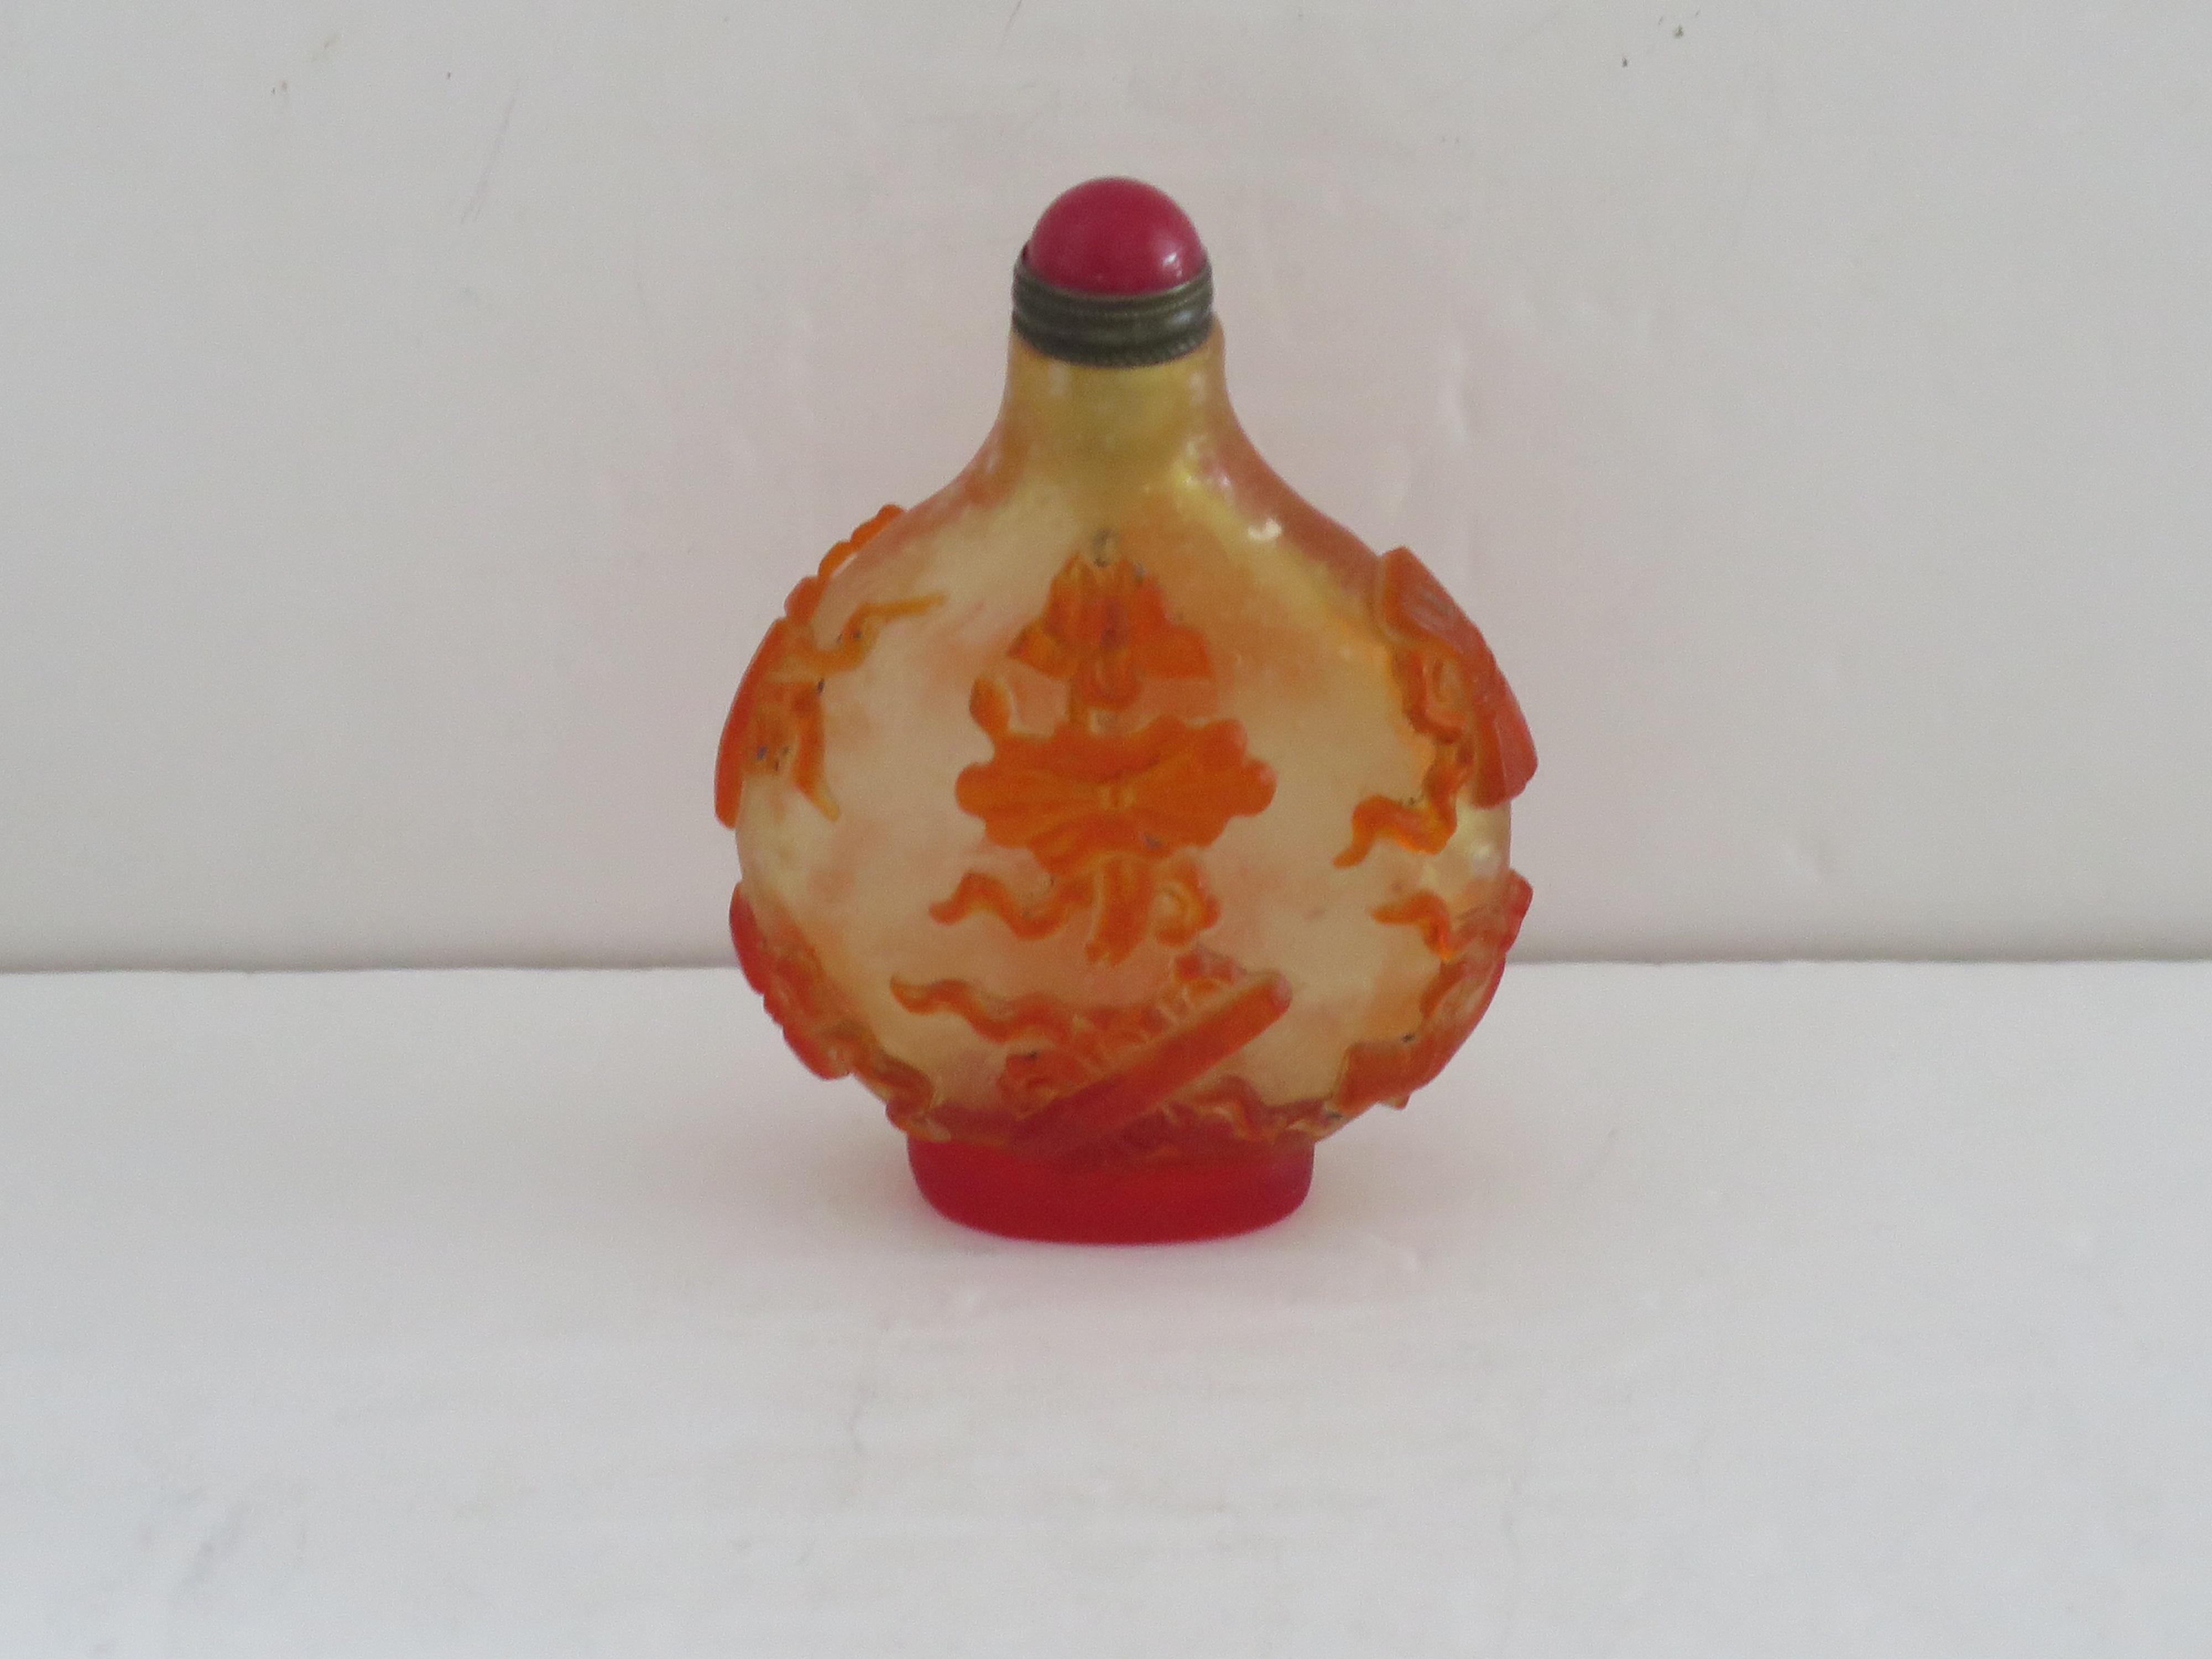 Chinese Export Snuff Bottle in Overlay Cameo Glass Finely Carved, circa 1925 In Good Condition For Sale In Lincoln, Lincolnshire